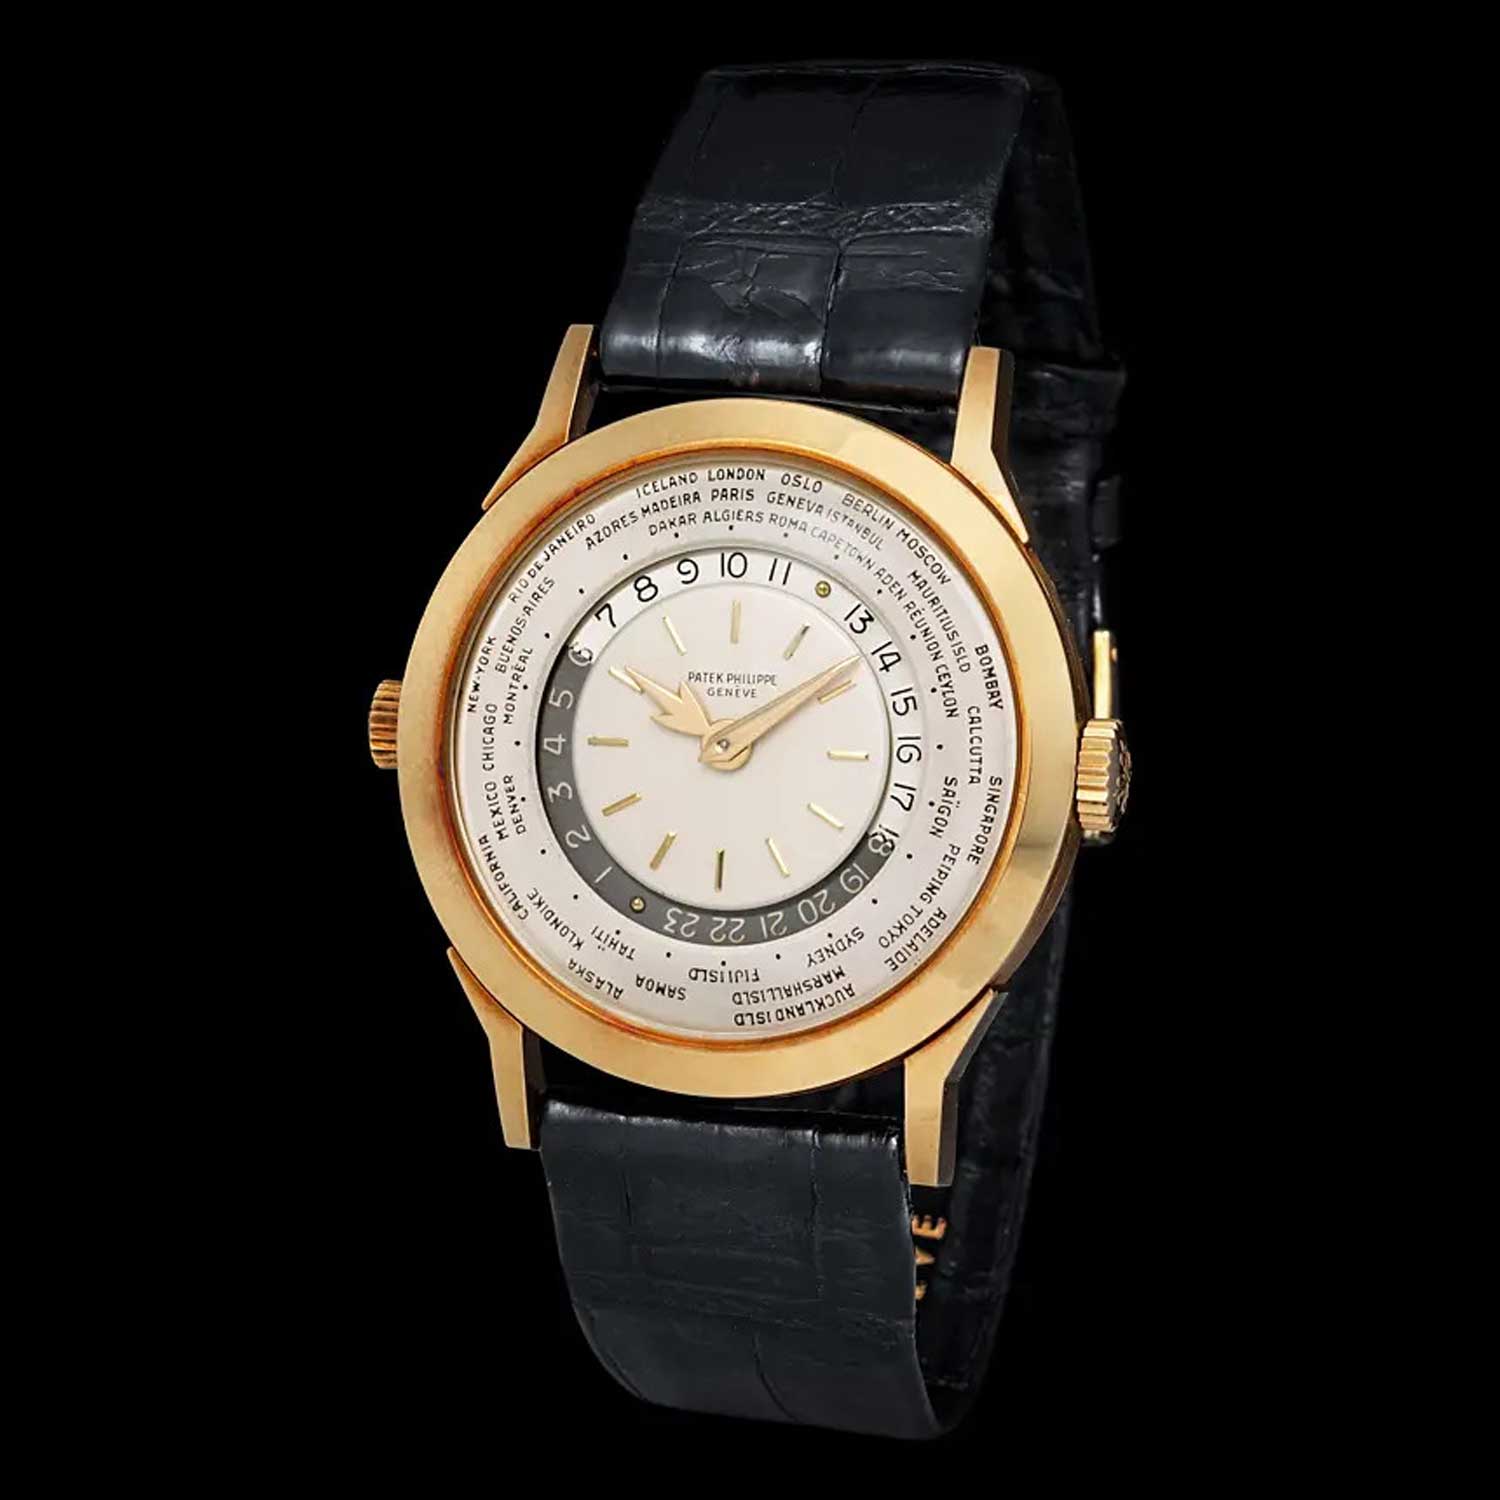 Patek Philippe World Time reference 2523/1